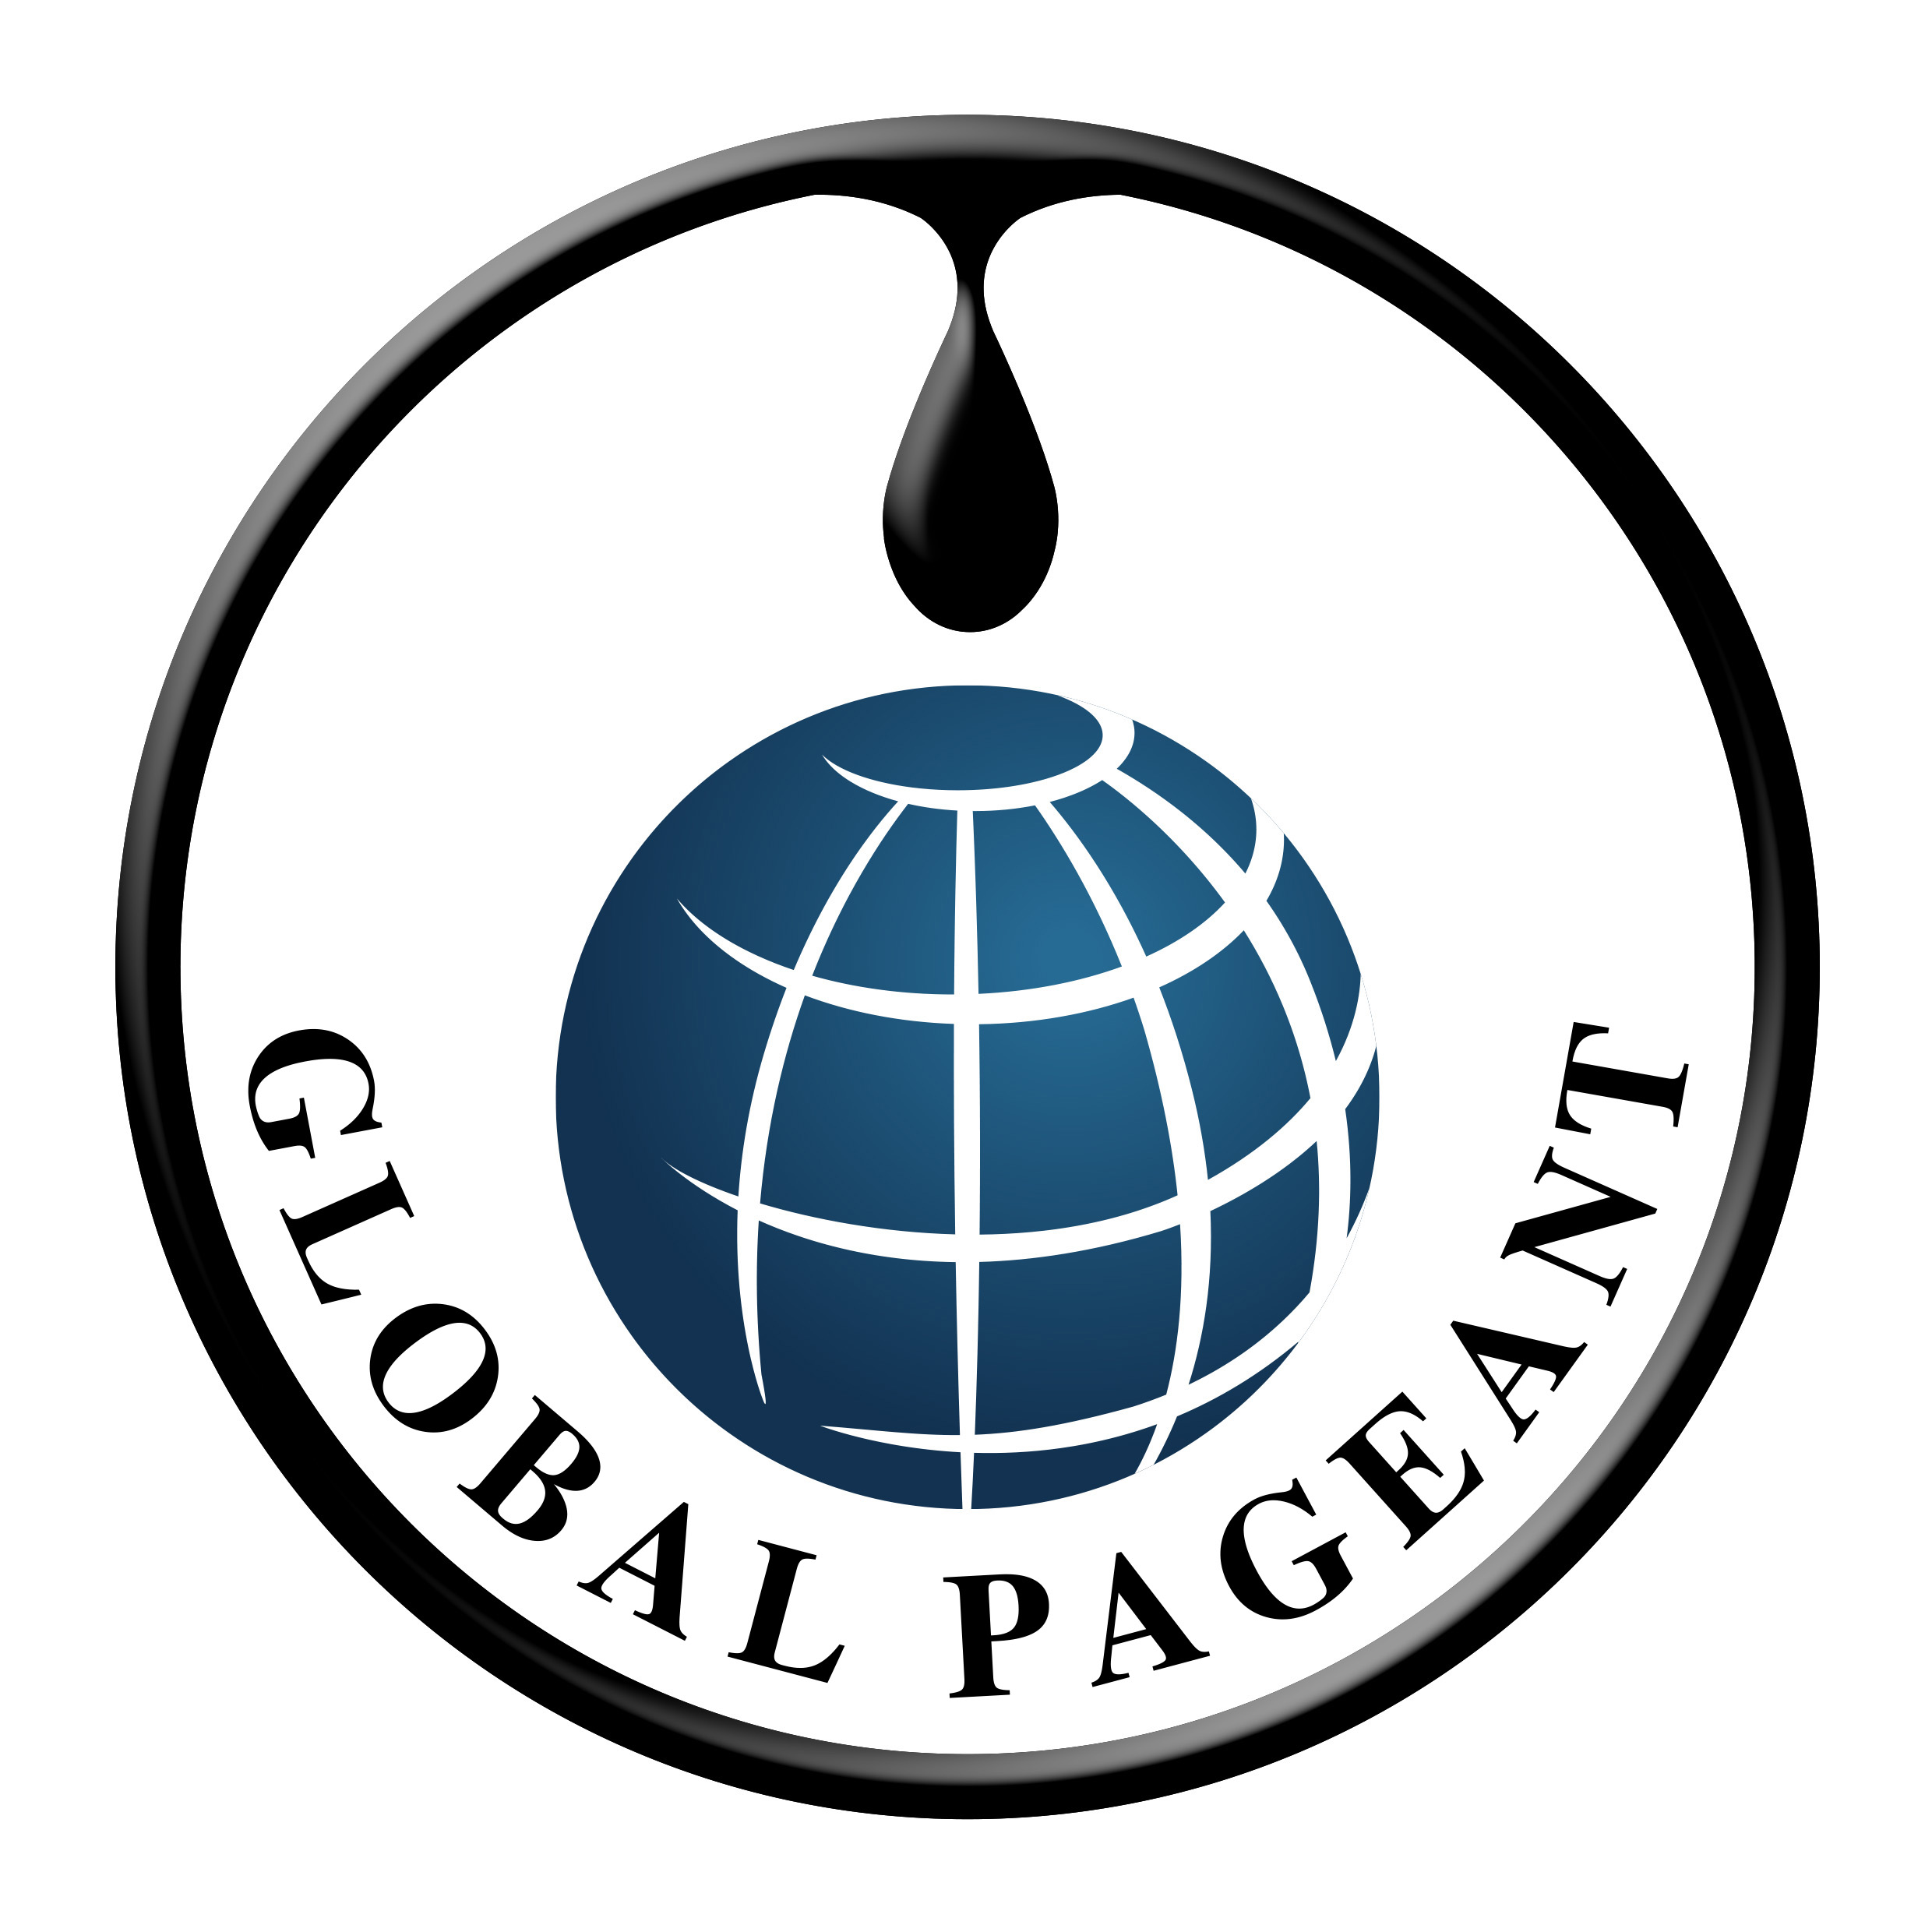 https://www.mncjobsgulf.com/company/global-pageant-engineering-consultants-llc